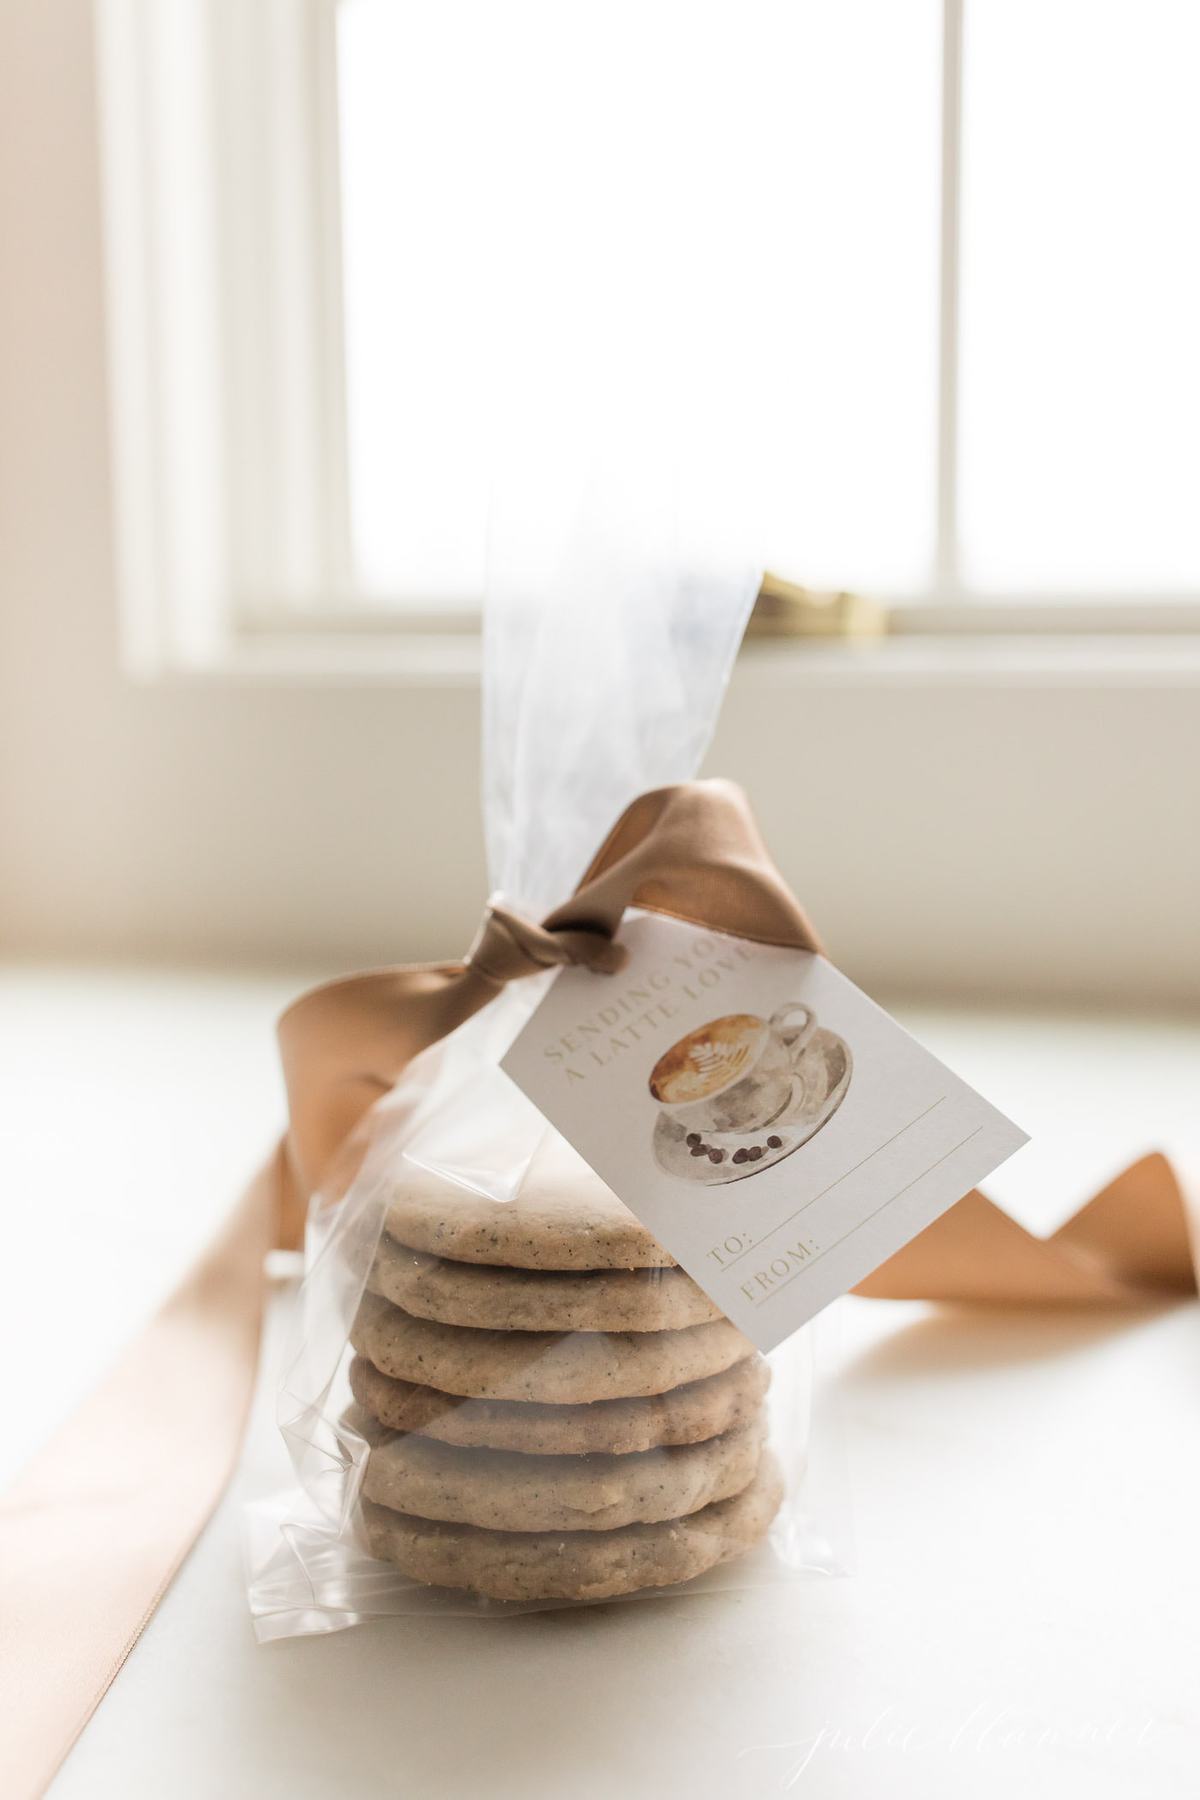 espresso cookies in a cello wrapped stack, tied with a brown satin bow and gift tag that reads "sending you a latte love"